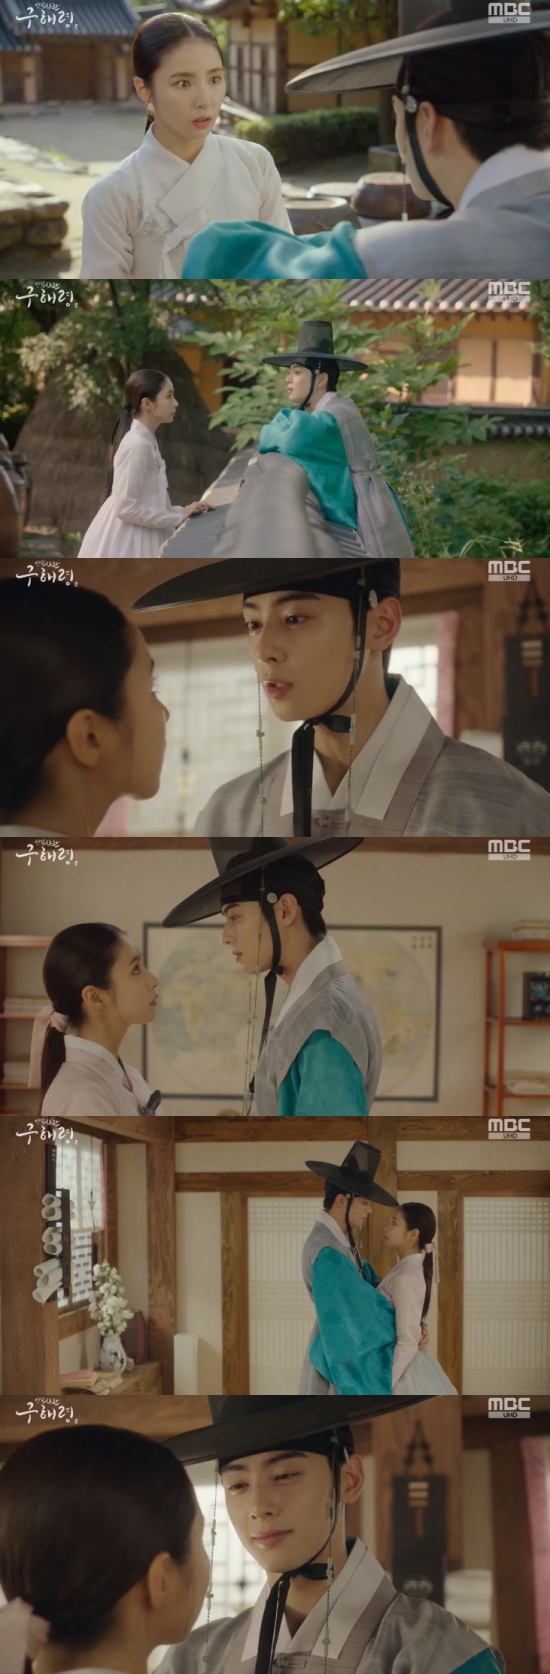 New officer Rookie Historian Goo Hae-ryung Cha Eun-woo reveals fondness for Shin Se-kyungIn the 29th episode of MBCs New Entrepreneur Rookie Historian Goo Hae-ryung broadcast on the 4th, Lee Rim (Cha Eun-woo) was shown visiting the house of Rookie Historian Goo Hae-ryung (Shin Se-kyung).On this day, Leerim went home knowing that Rookie Historian Goo Hae-ryung was a day off. Leerim said, It is a day off.Is there anyone in there? asked Rookie Historian Goo Hae-ryung, joking, Its a room in GLOW, where you want to come in in broad daylight.Lee also said, Do you mean to come back at night? Rookie Historian Goo Hae-ryung hurriedly cleared the room and let it in.Lee also looked slowly at the room of Rookie Historian Goo Hae-ryung, and Rookie Historian Goo Hae-ryung said, What do you see that?Youre not the first, he asked.Irim said, Is not your feelings different?It was the room of Gussari at that time and now it is the room of my GLOW. Irim said, It is too early to claim each others ownership. Irim approached Rookie Historian Goo Hae-ryung, saying, What is the right time to do?Rookie Historian Goo Hae-ryung said: You have a pretty bad attitude today.Im not sure if youve decided. I hope you meet every day. Like this. Not in the palace. No remorse, no uniform.Without a sergeant or a large army, its just like this, Confessions said.Photo = MBC Broadcasting Screen